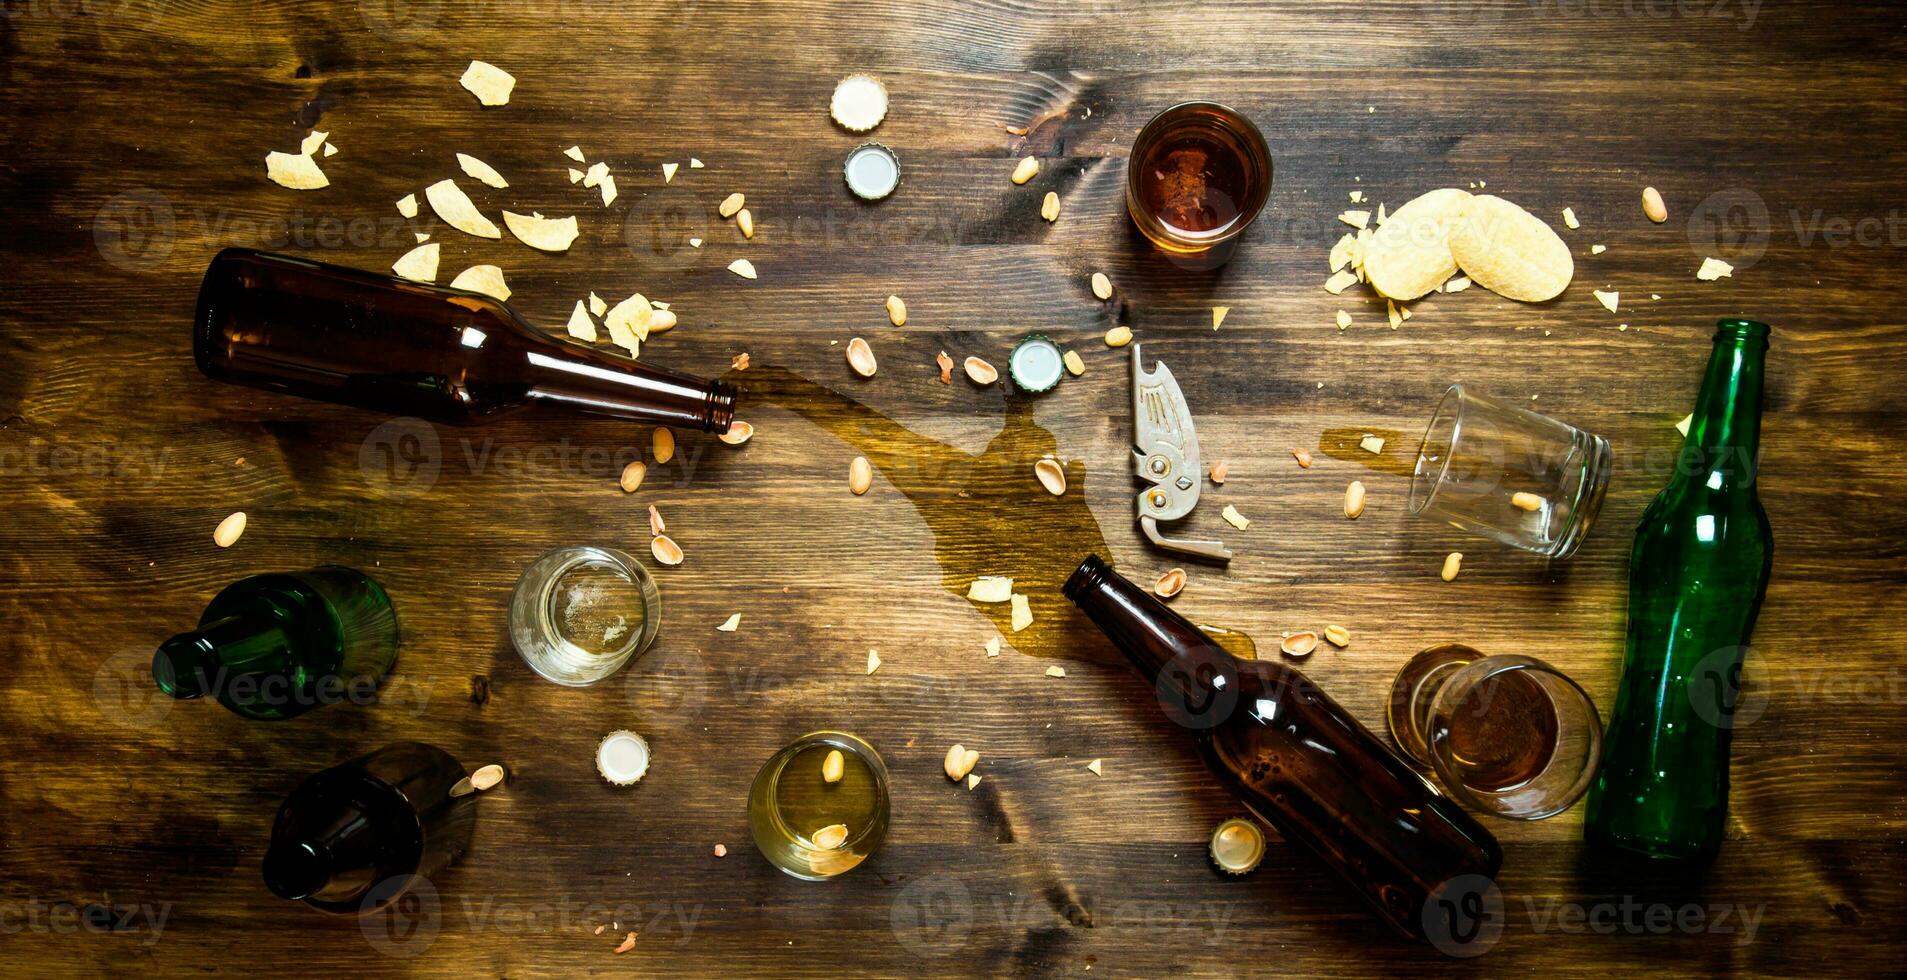 In the process of party - spilled beer, bottle caps and leftover chips on the table. photo